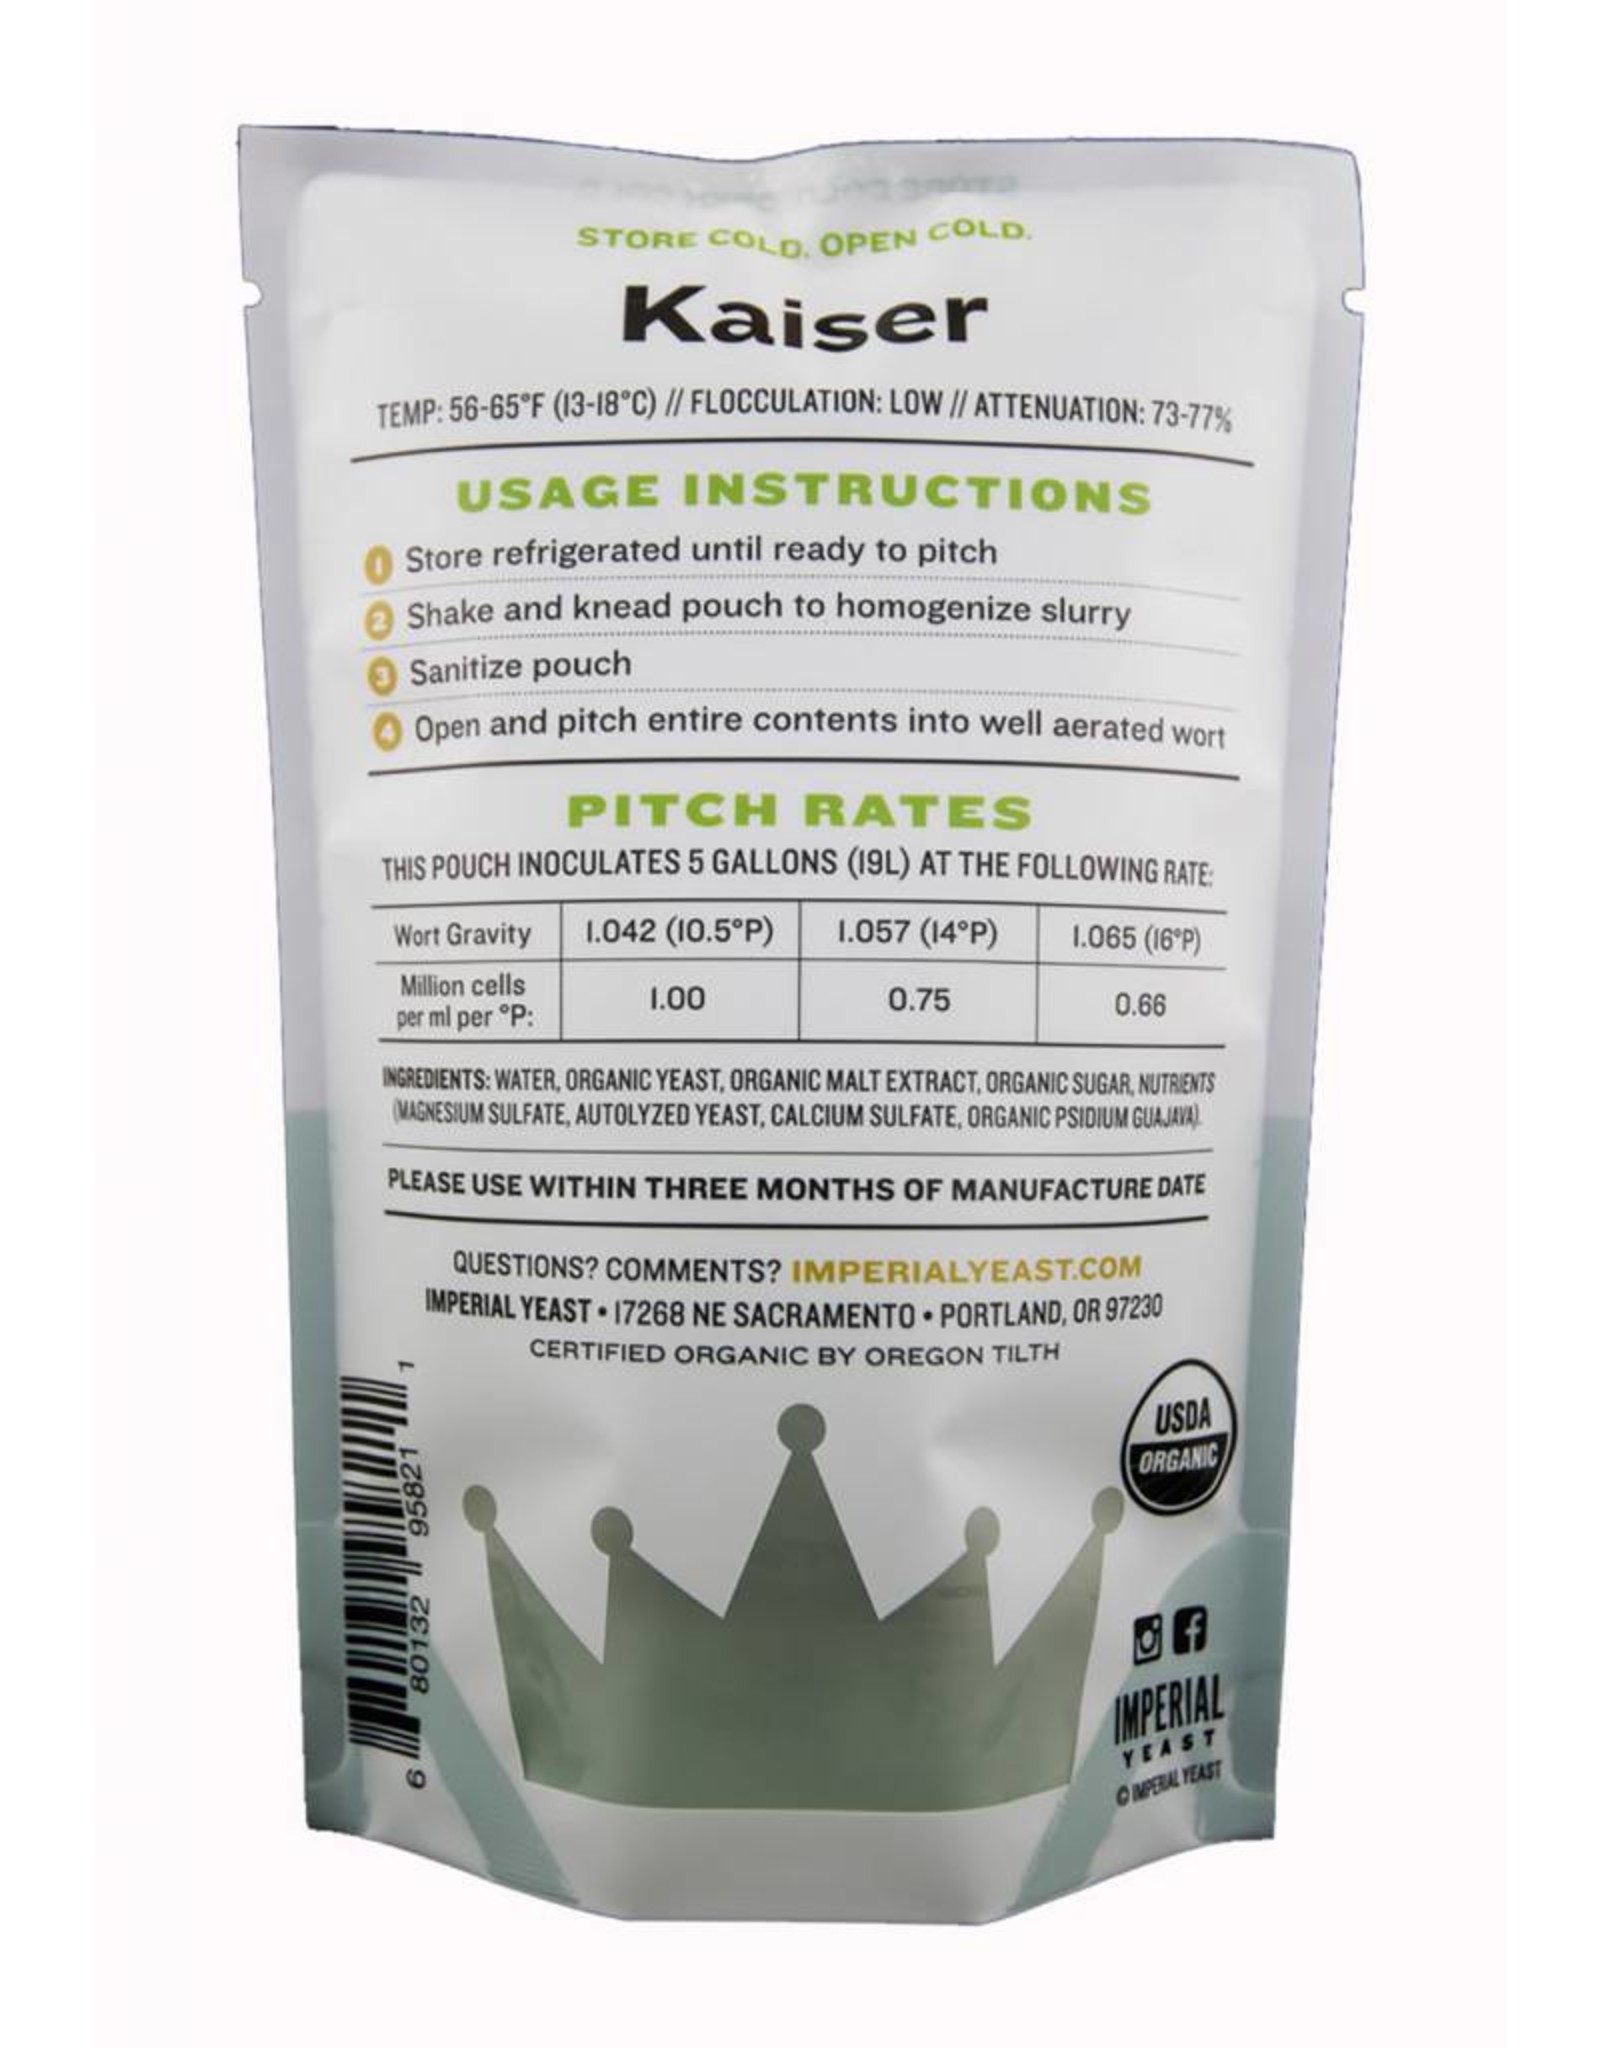 Imperial Yeast Imperial Yeast G02 - Kaiser